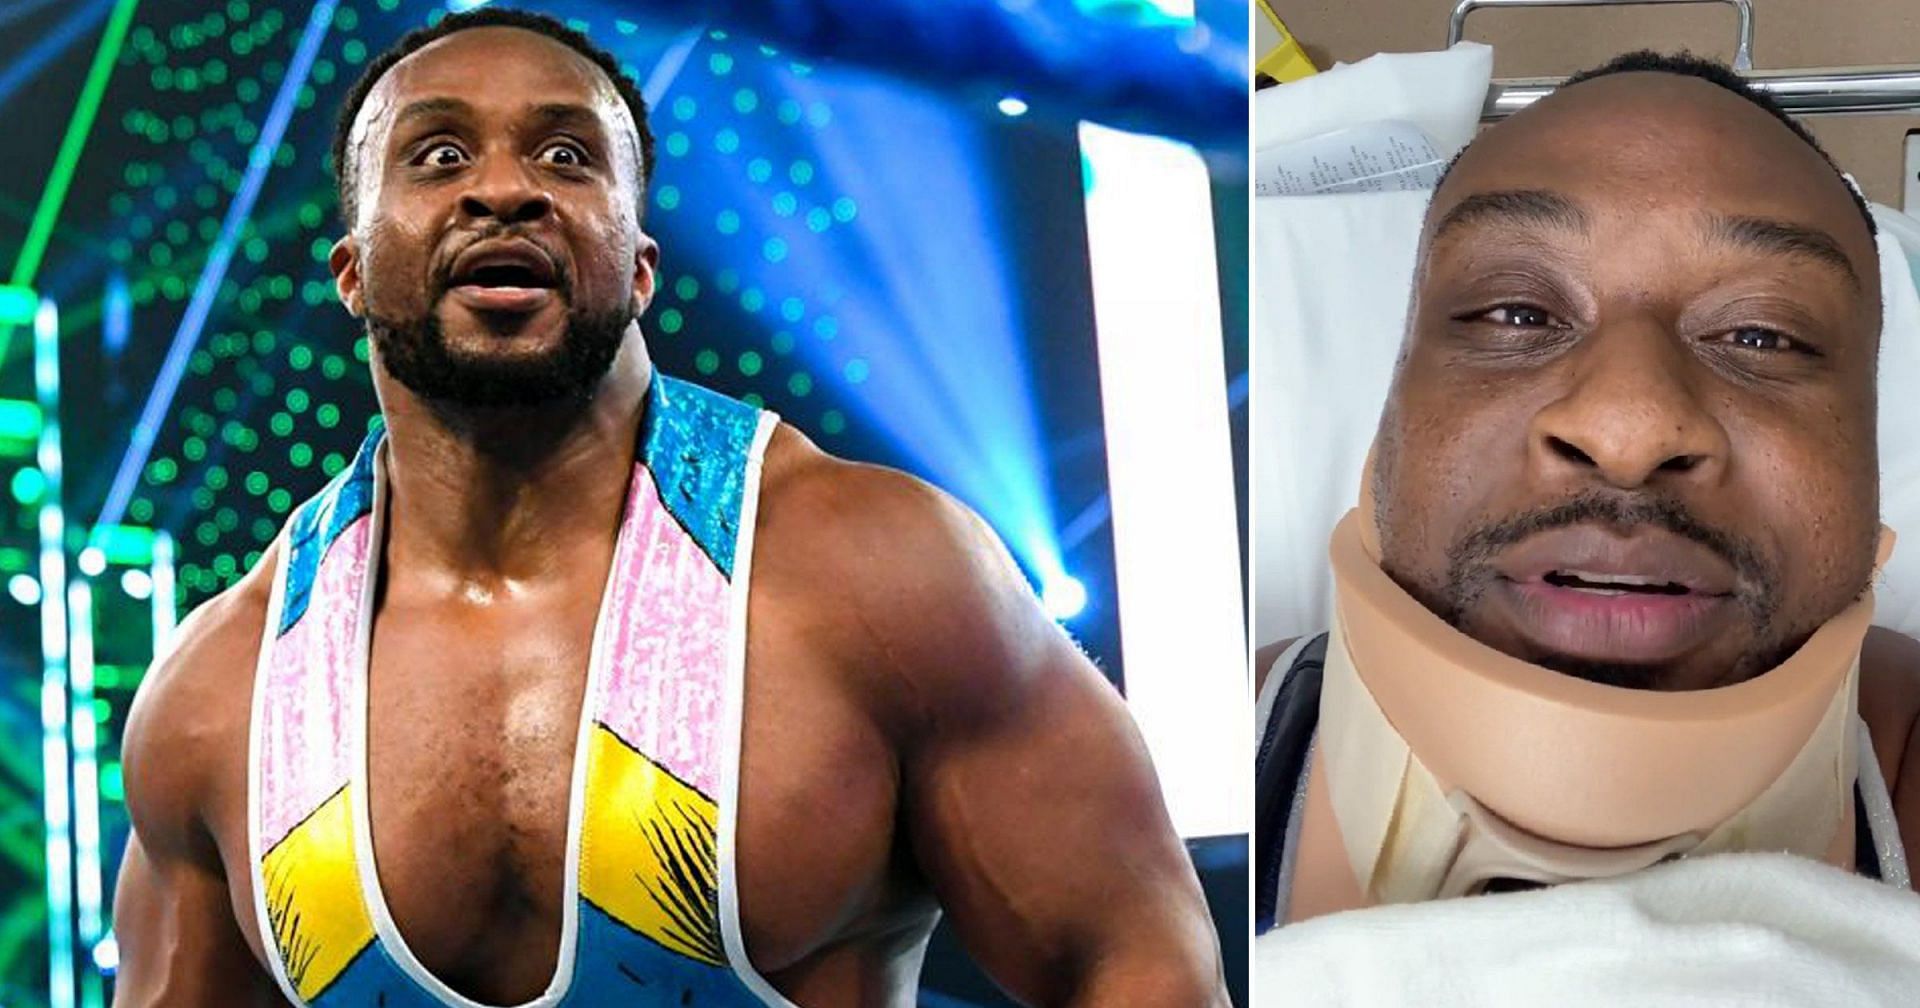 Big E suffered a horrific injury in March!